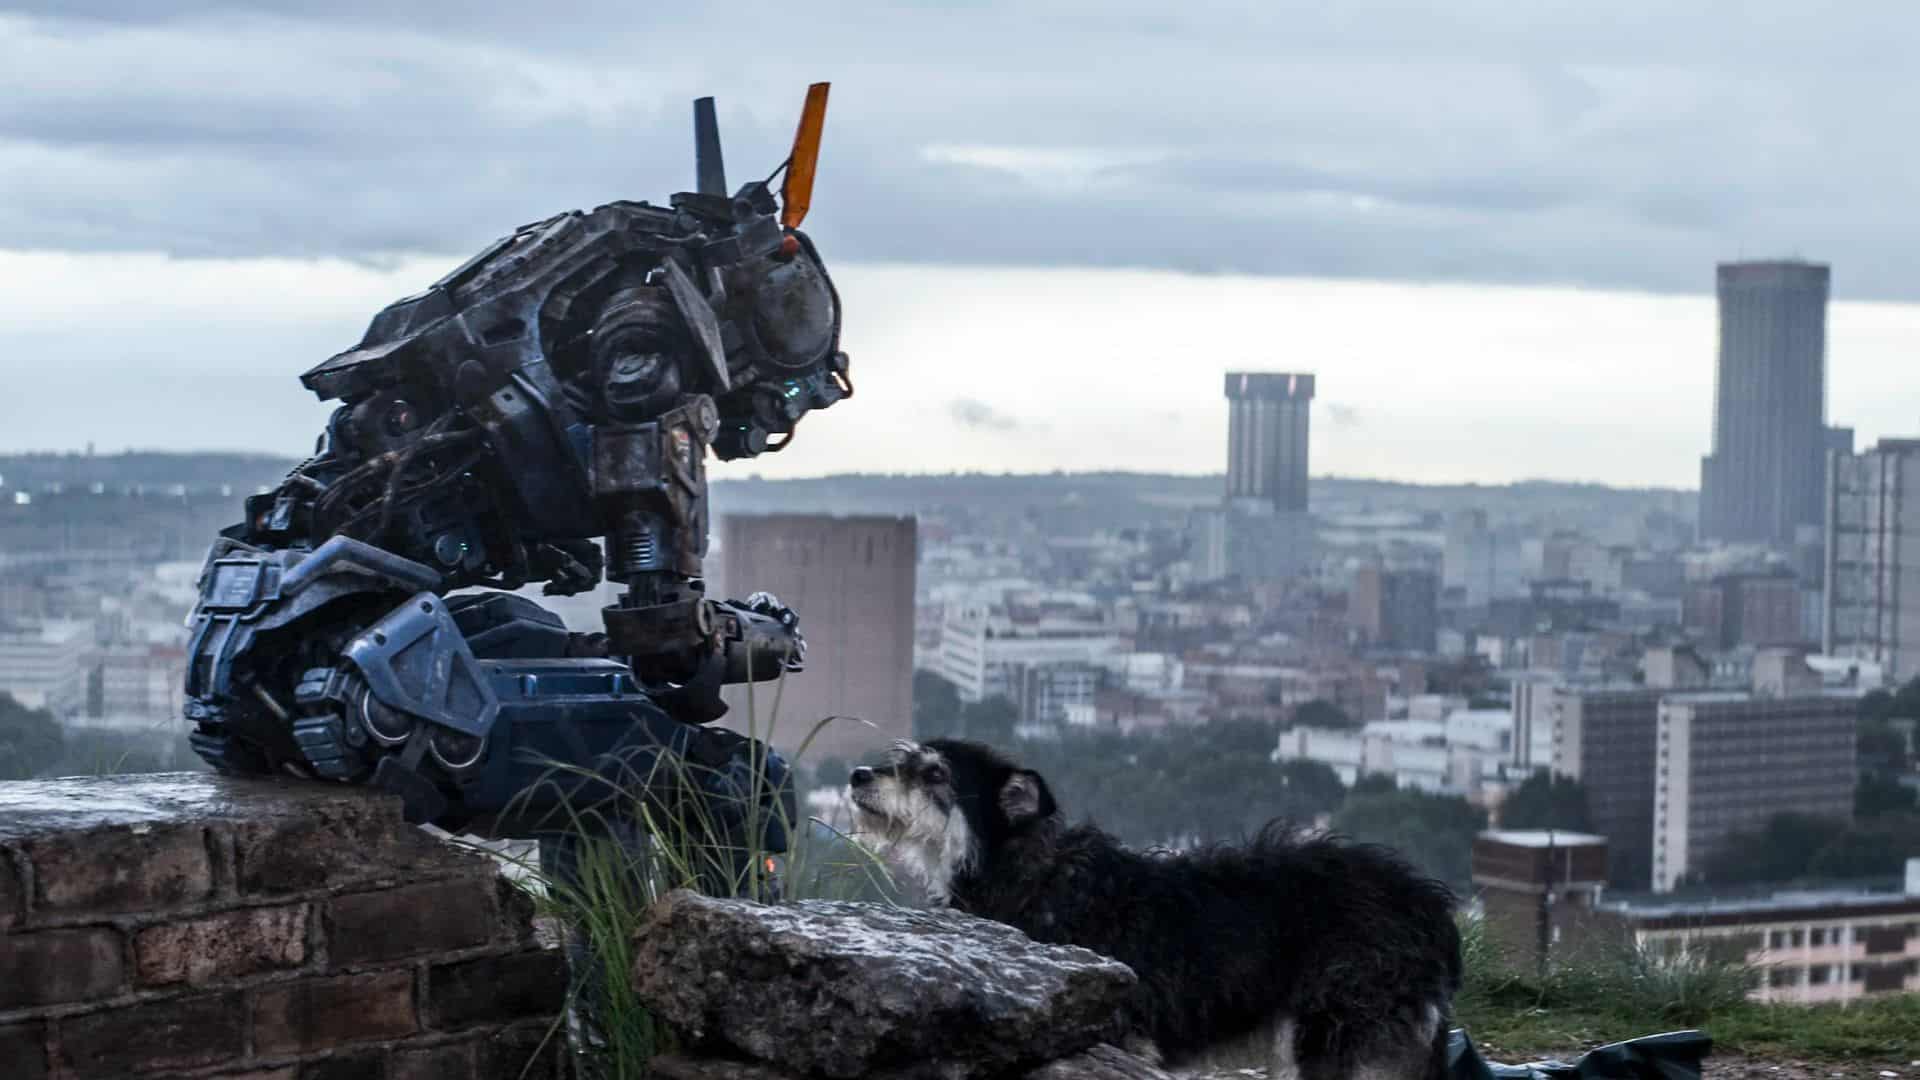 Chappie sits with a dog while overlooking the city in this image from Amazon Prime Video.